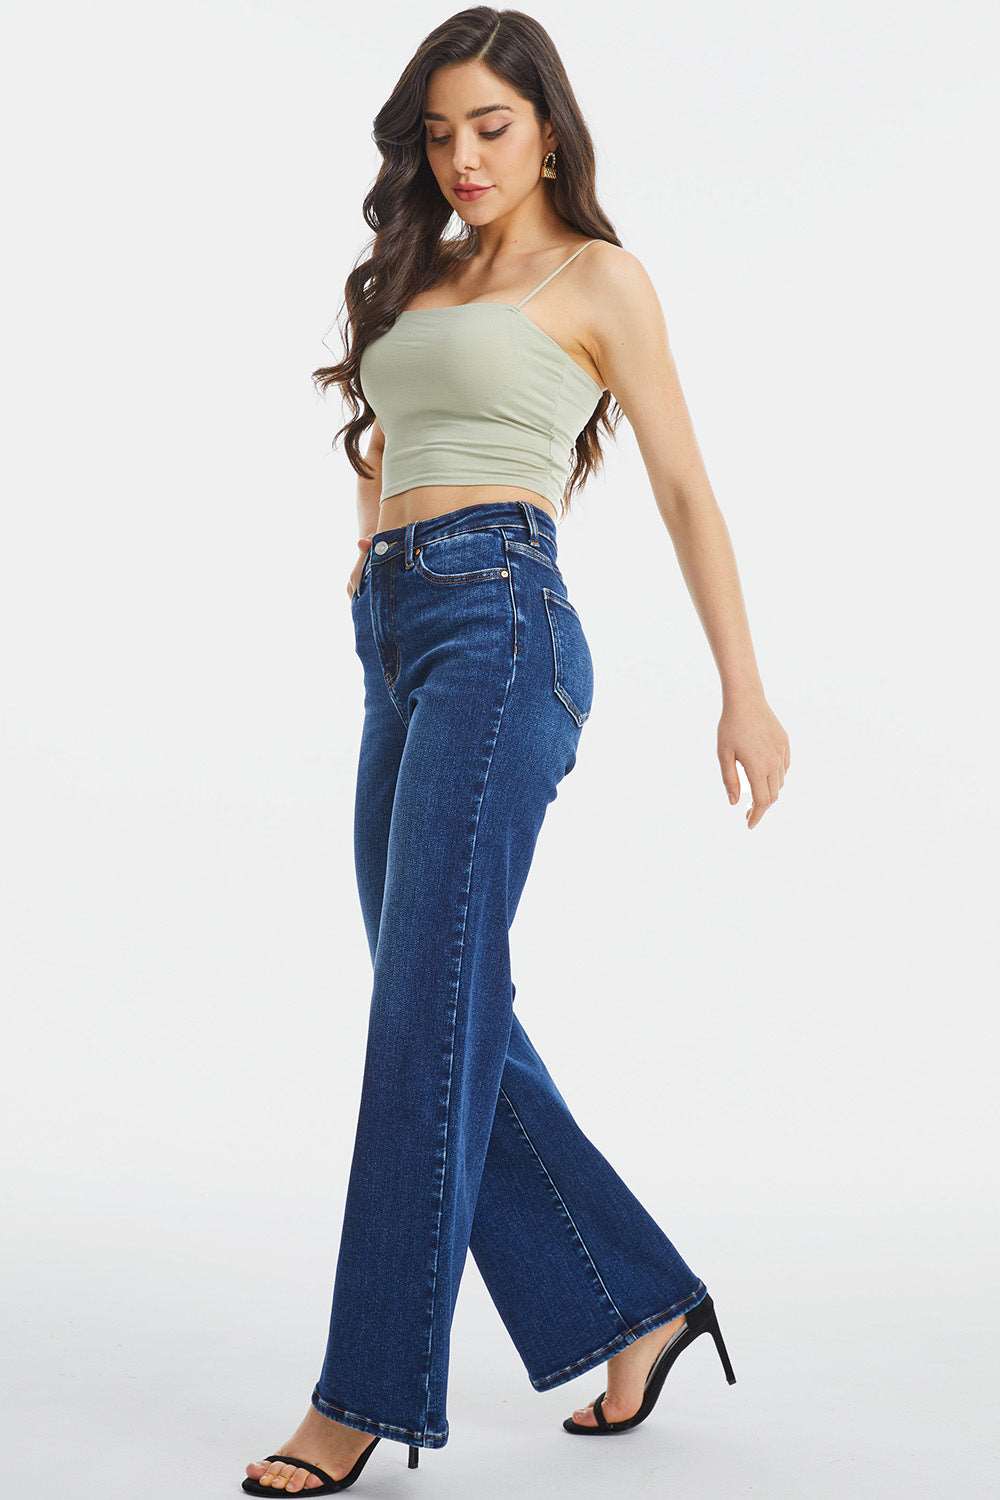 BAYEAS Full Size High Waist Cat's Whisker Wide Leg Jeans apparel & accessories